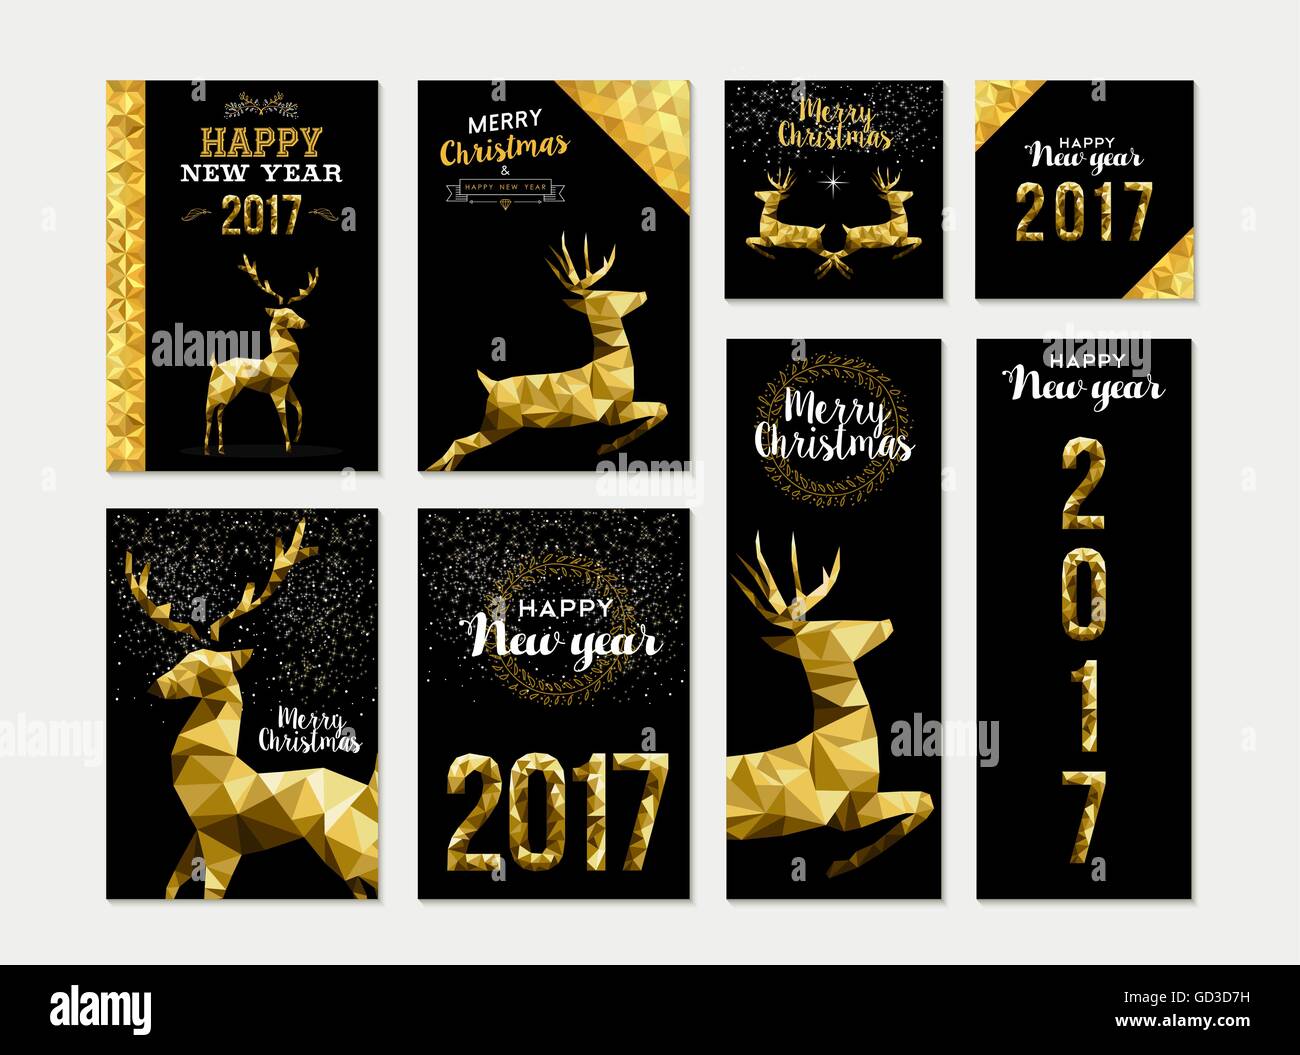 Set of merry christmas happy new year 2017 template gold designs with deer and celebration elements. Ideal for xmas cards Stock Vector